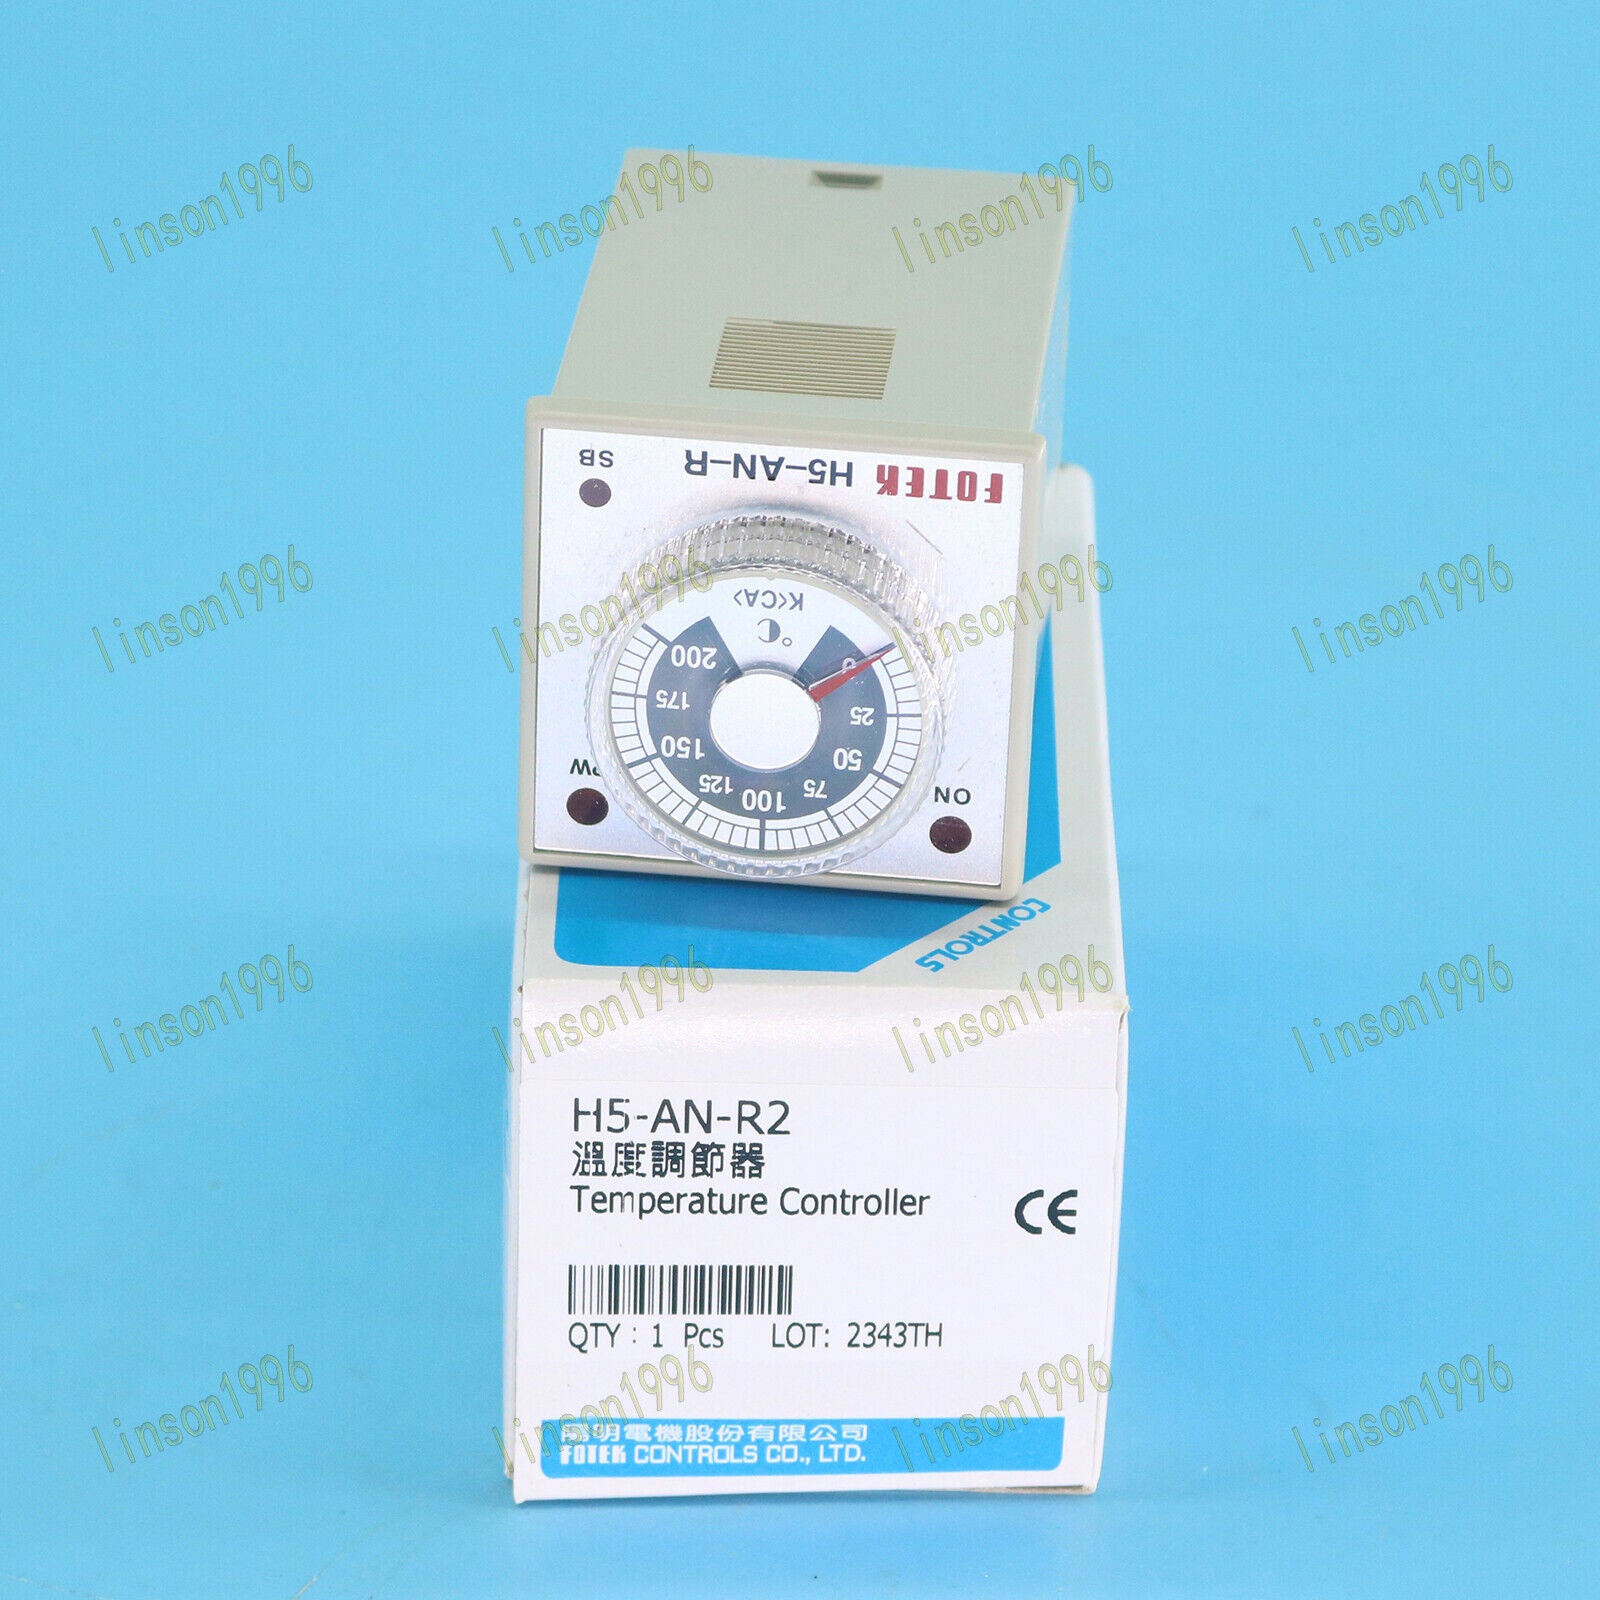 new 1PC  For FOTEK Temperature Controller H5-AN-R2 SHIP